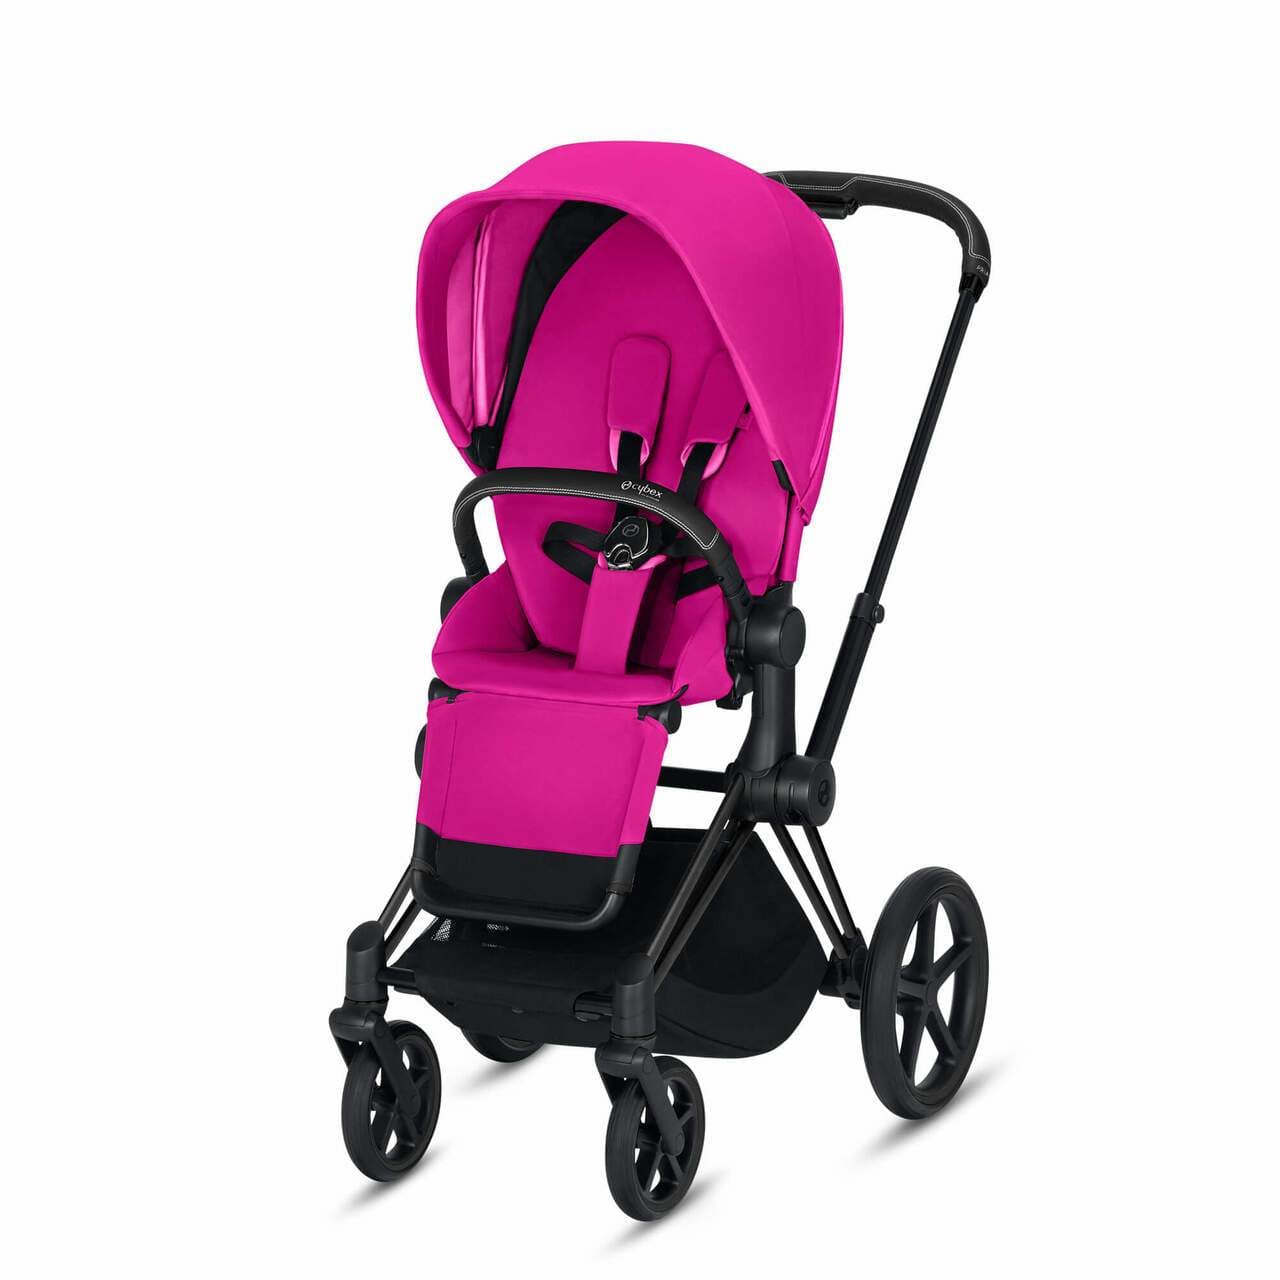  CYBEX ePriam 3-in-1 Travel System Matte with Black Details Baby Stroller – Fancy Pink 519003741 4058511710006
